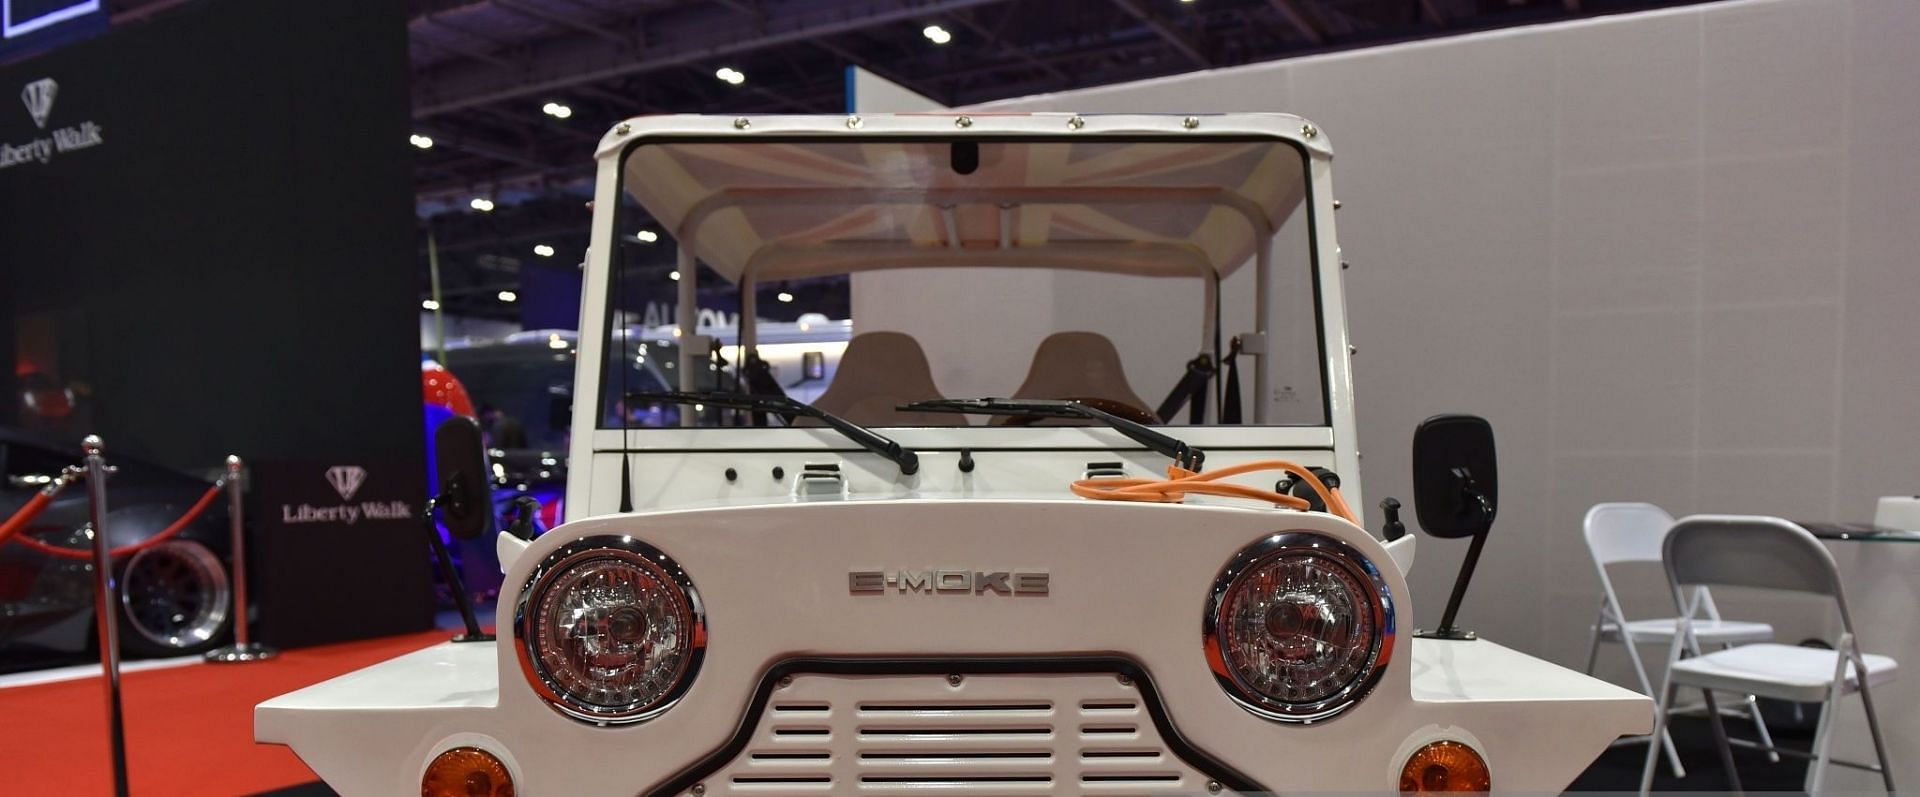 A Moke electric car starts from a price of $20,975 (Image via John Keeble/Getty Images)